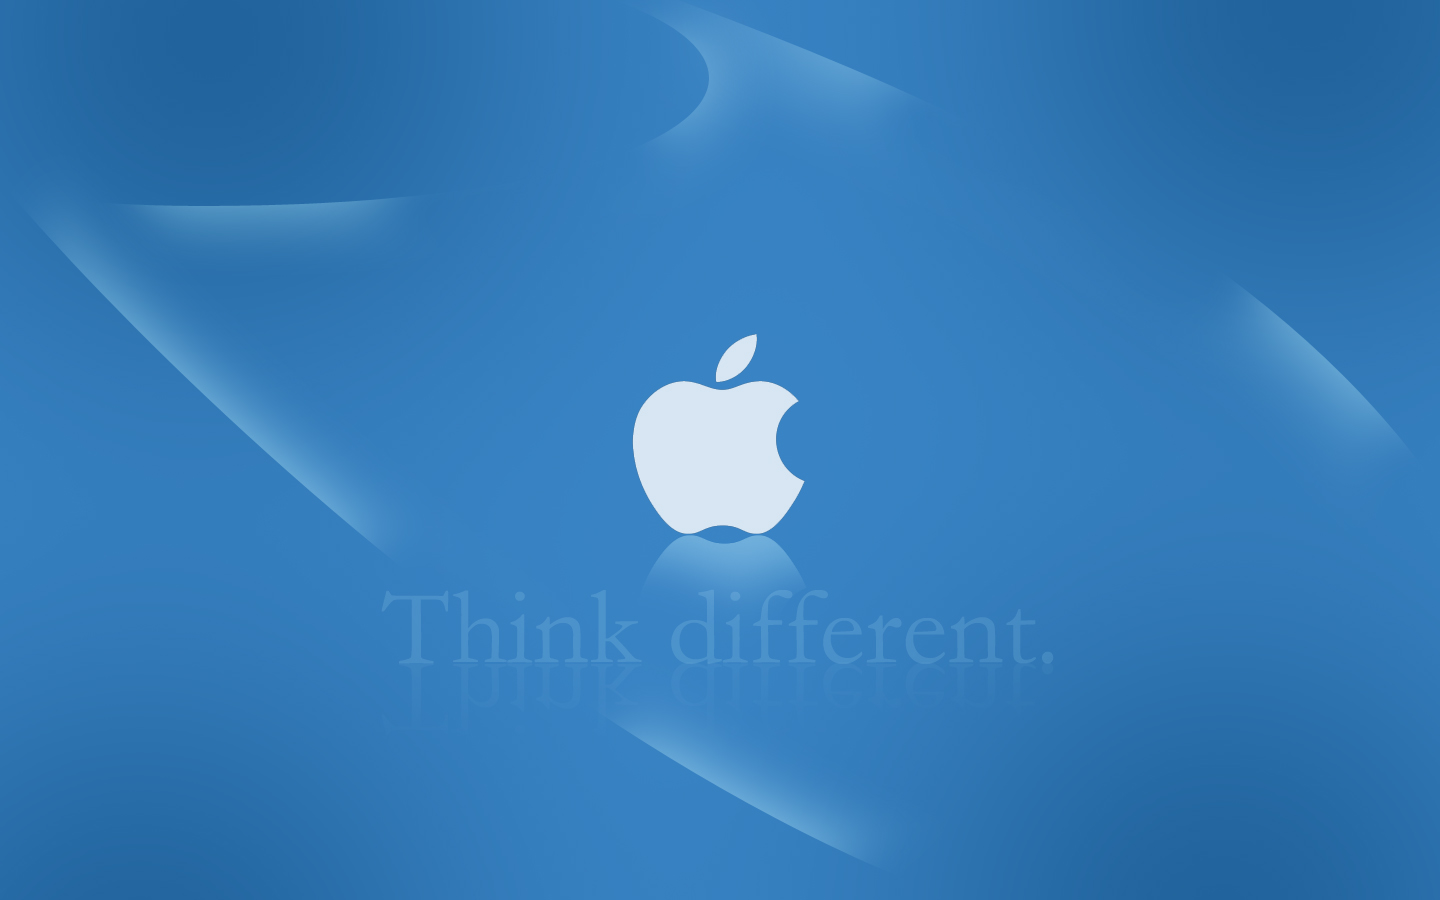 Image Located In Category Apple Mac Wallpaper